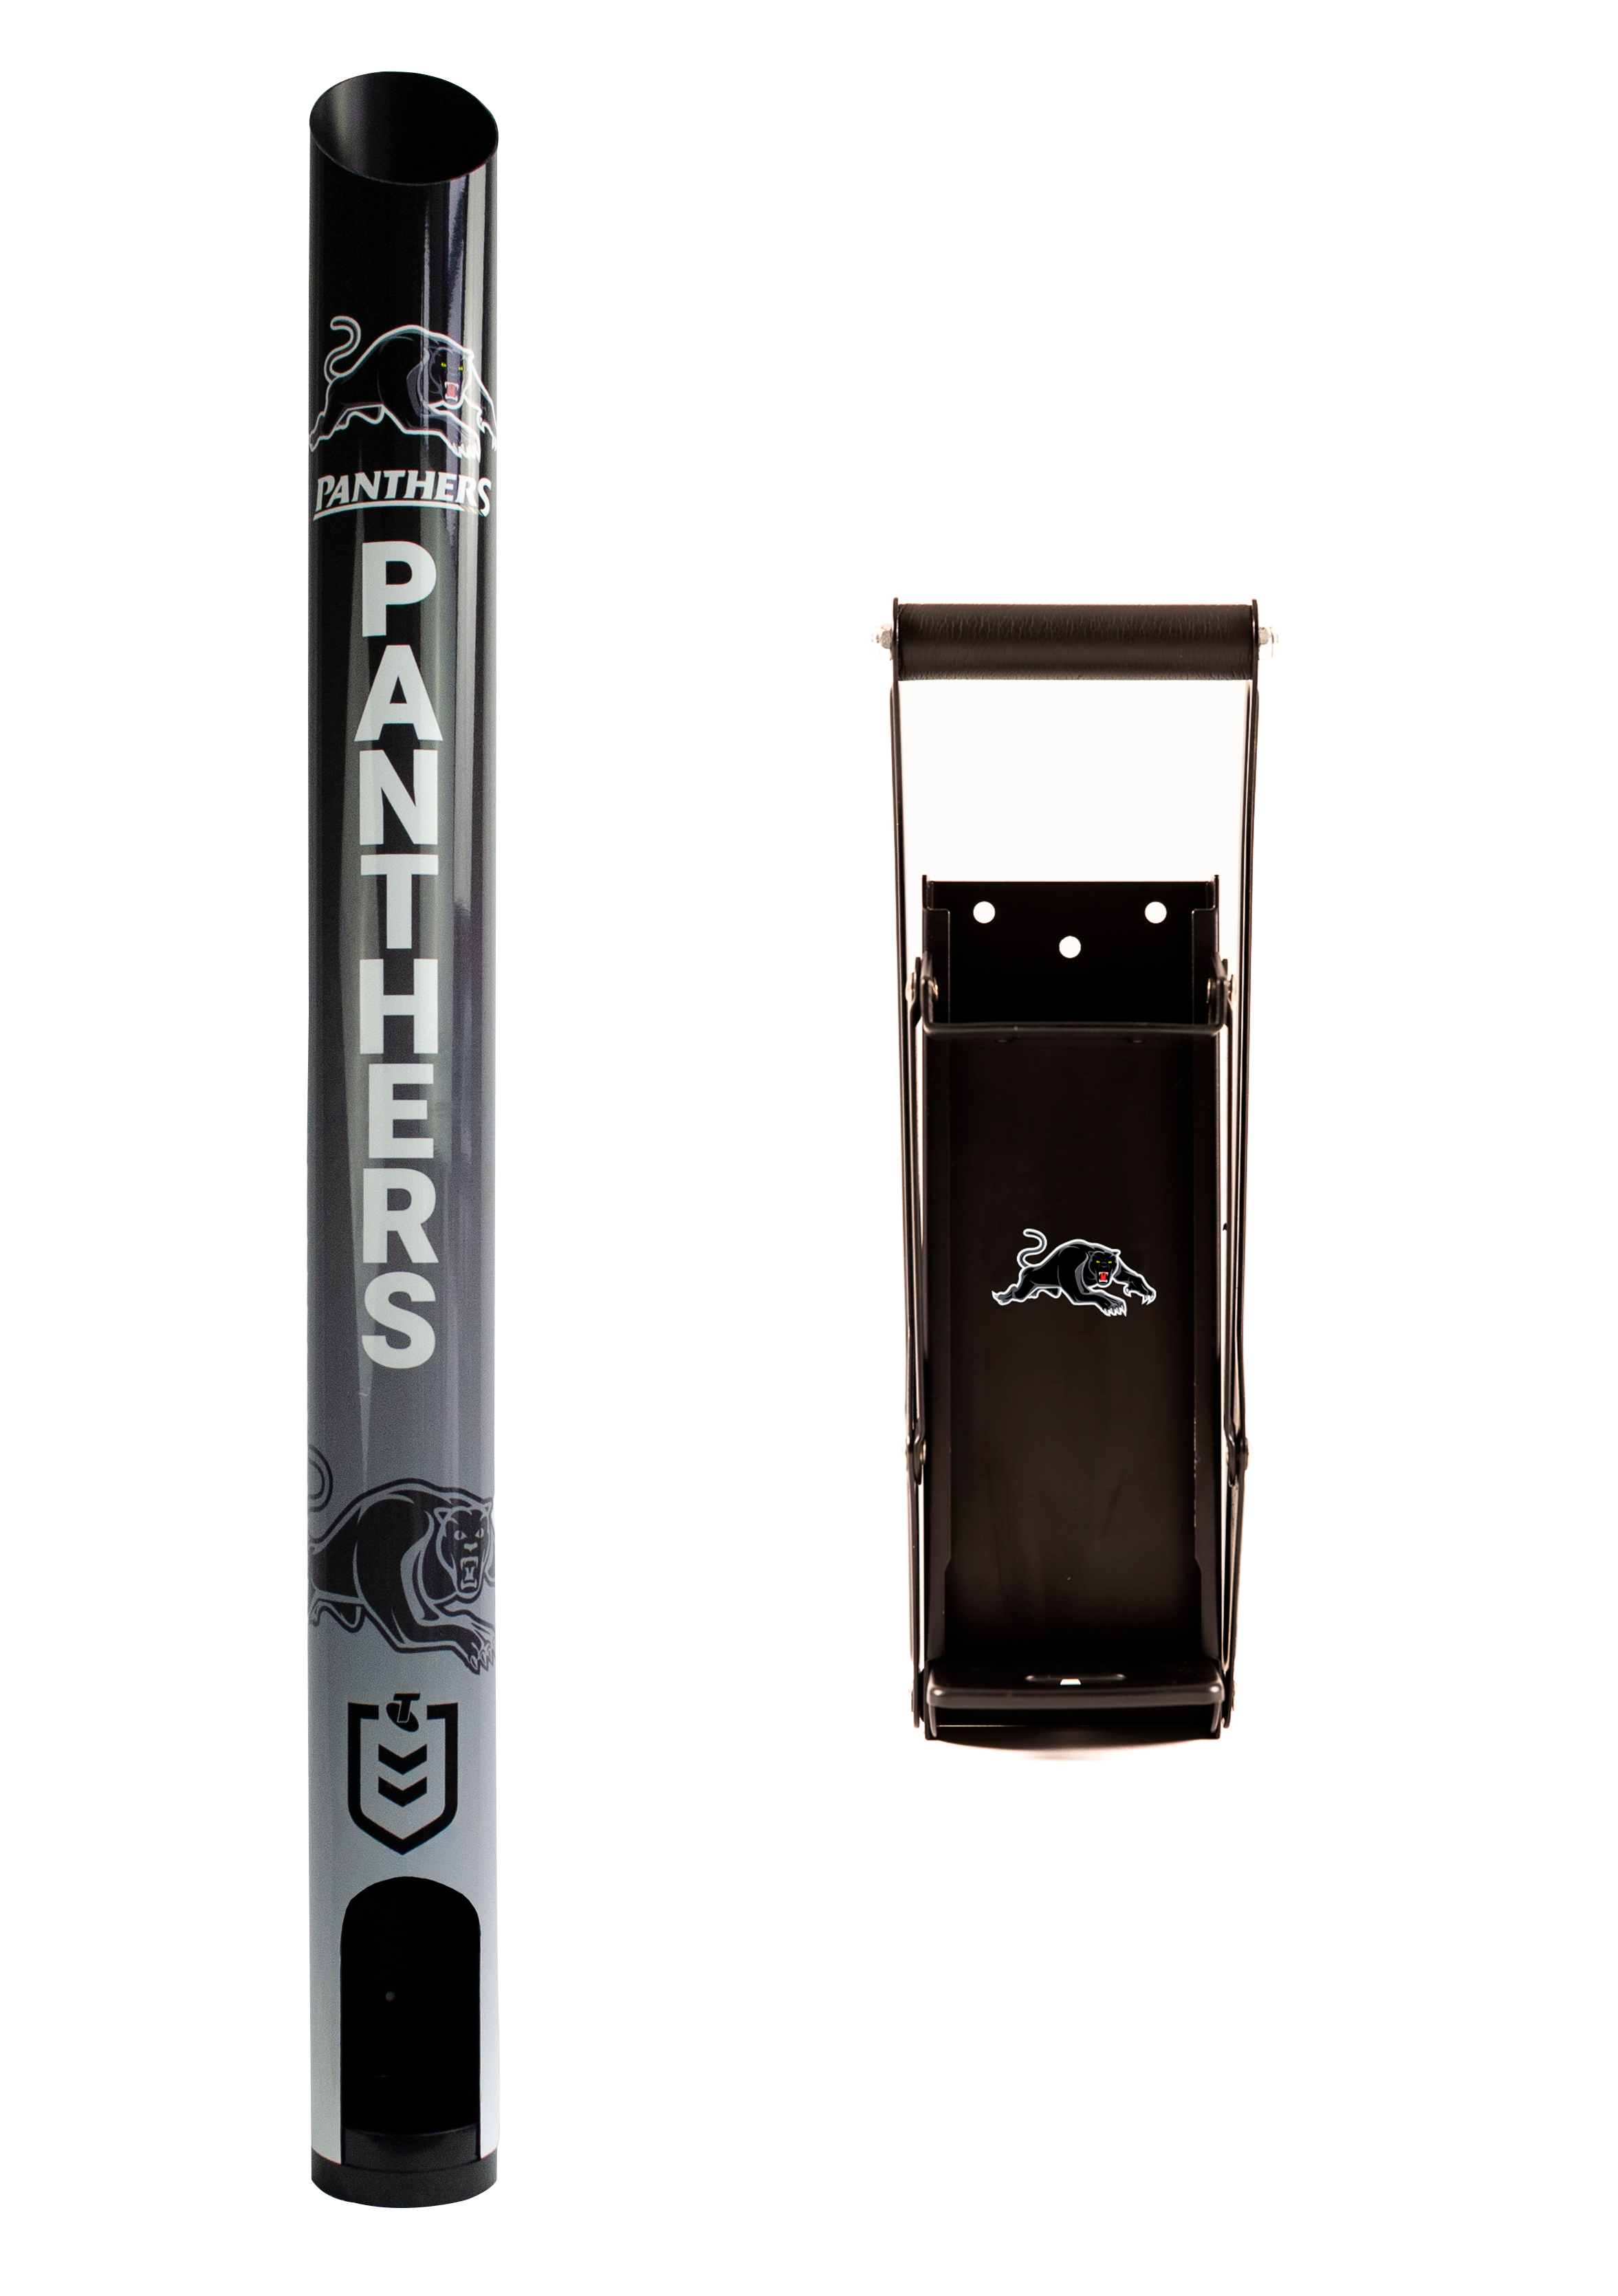 Penrith Panthers NRL Dispenser + Can Crusher Combo